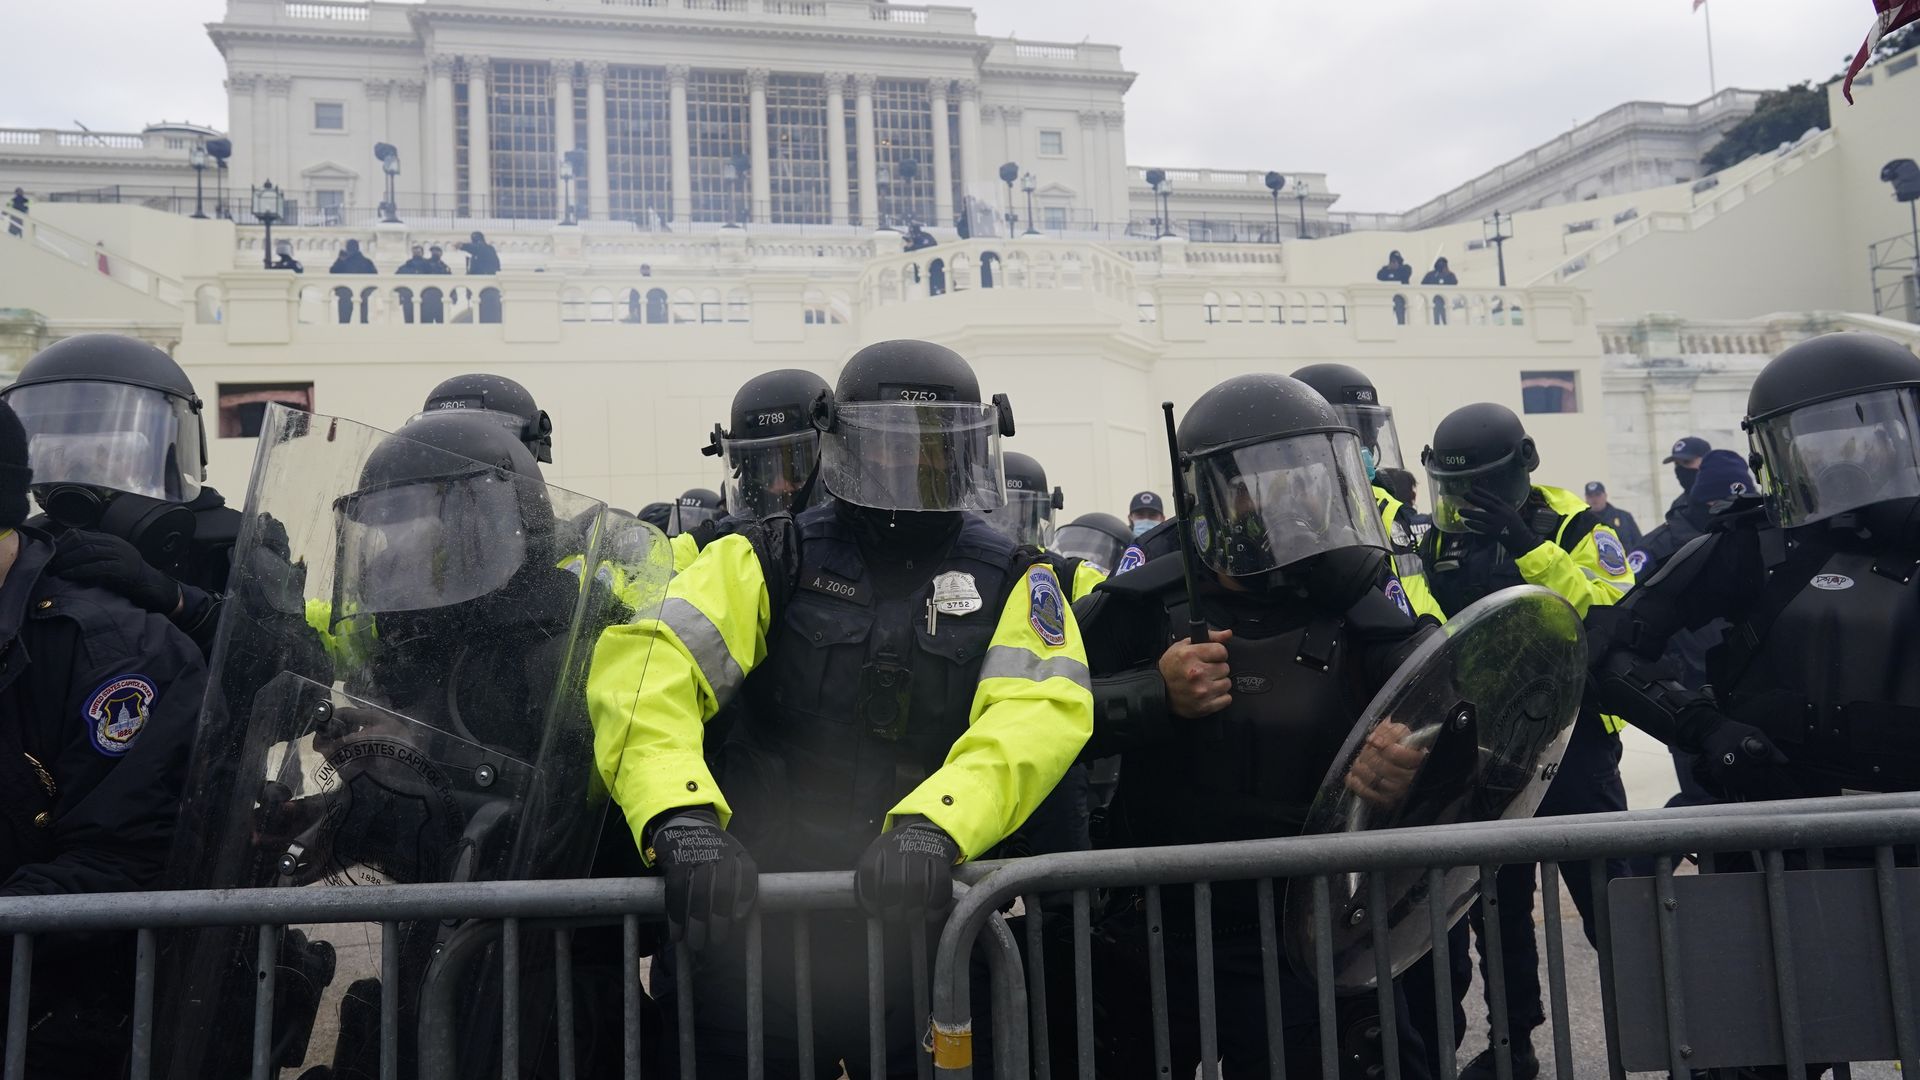 Capitol Police attempting to hold back people during the Jan. 6 riot at the U.S. Capitol.